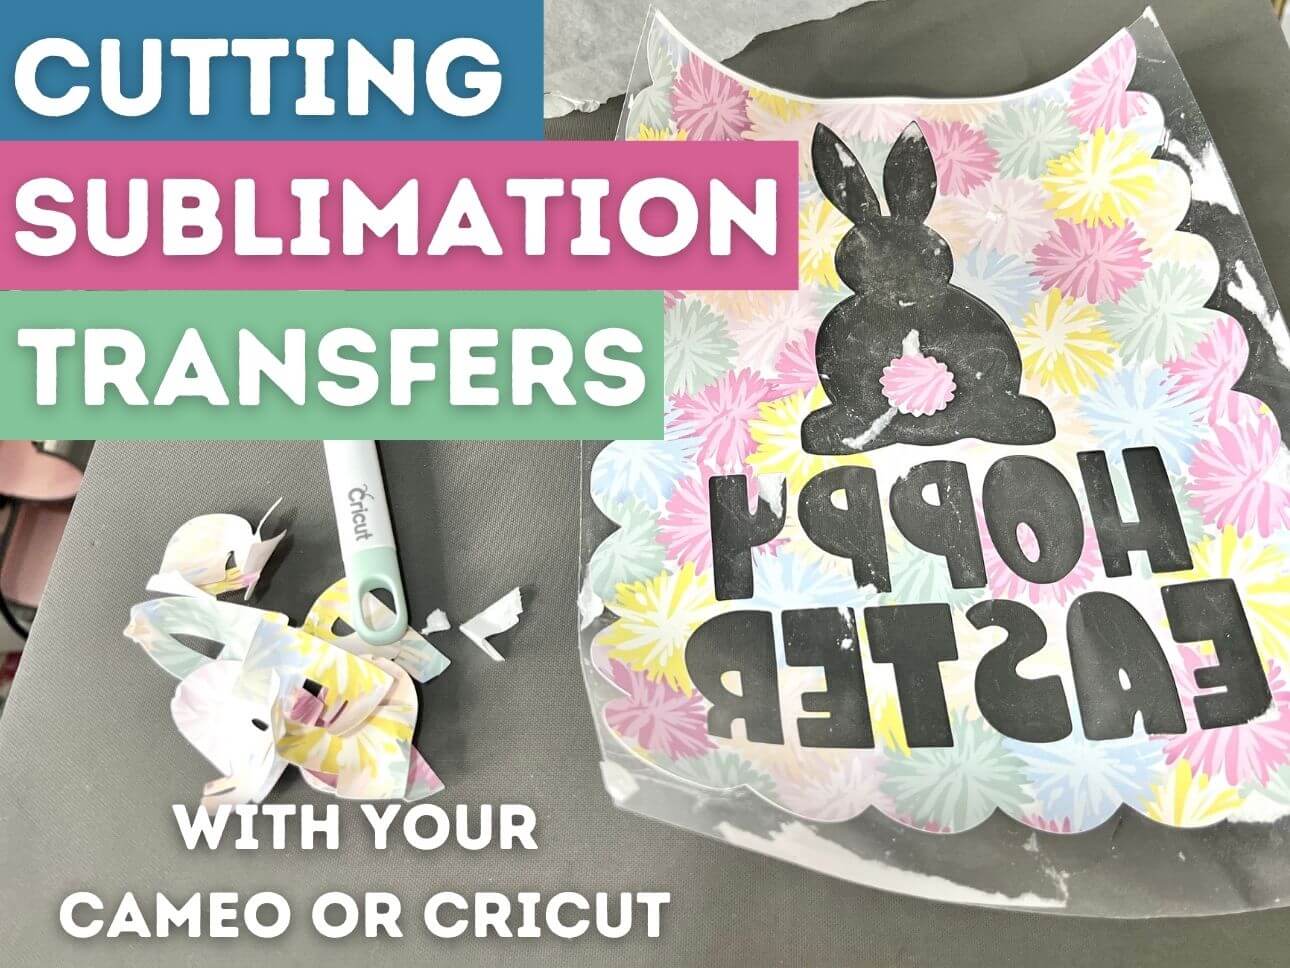 Cutting Sublimation Transfers with your Cameo or Cricut - Banner